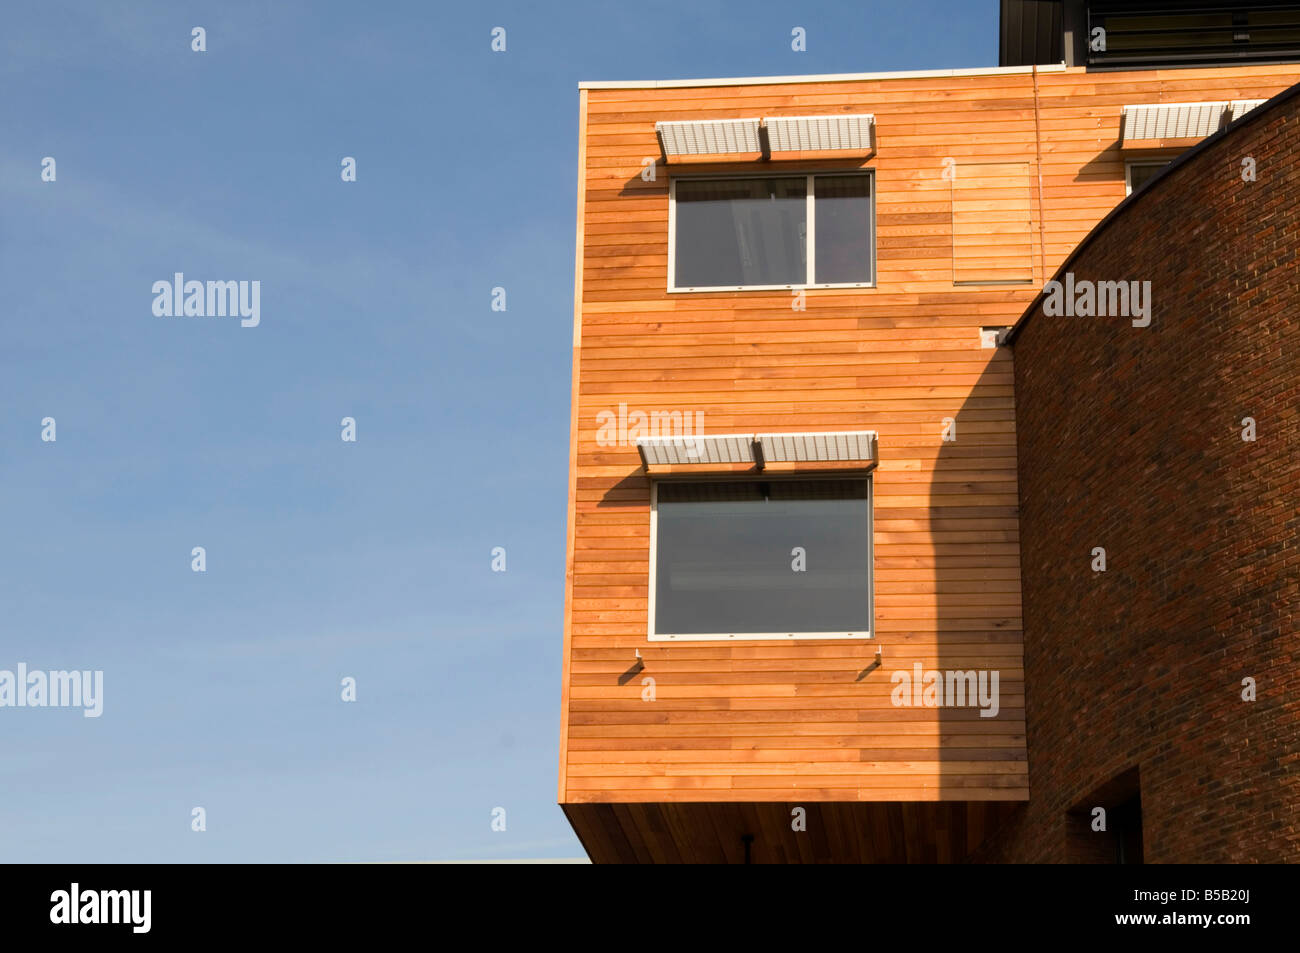 modern wooden building architecture timber building material sustainable materials wood Stock Photo